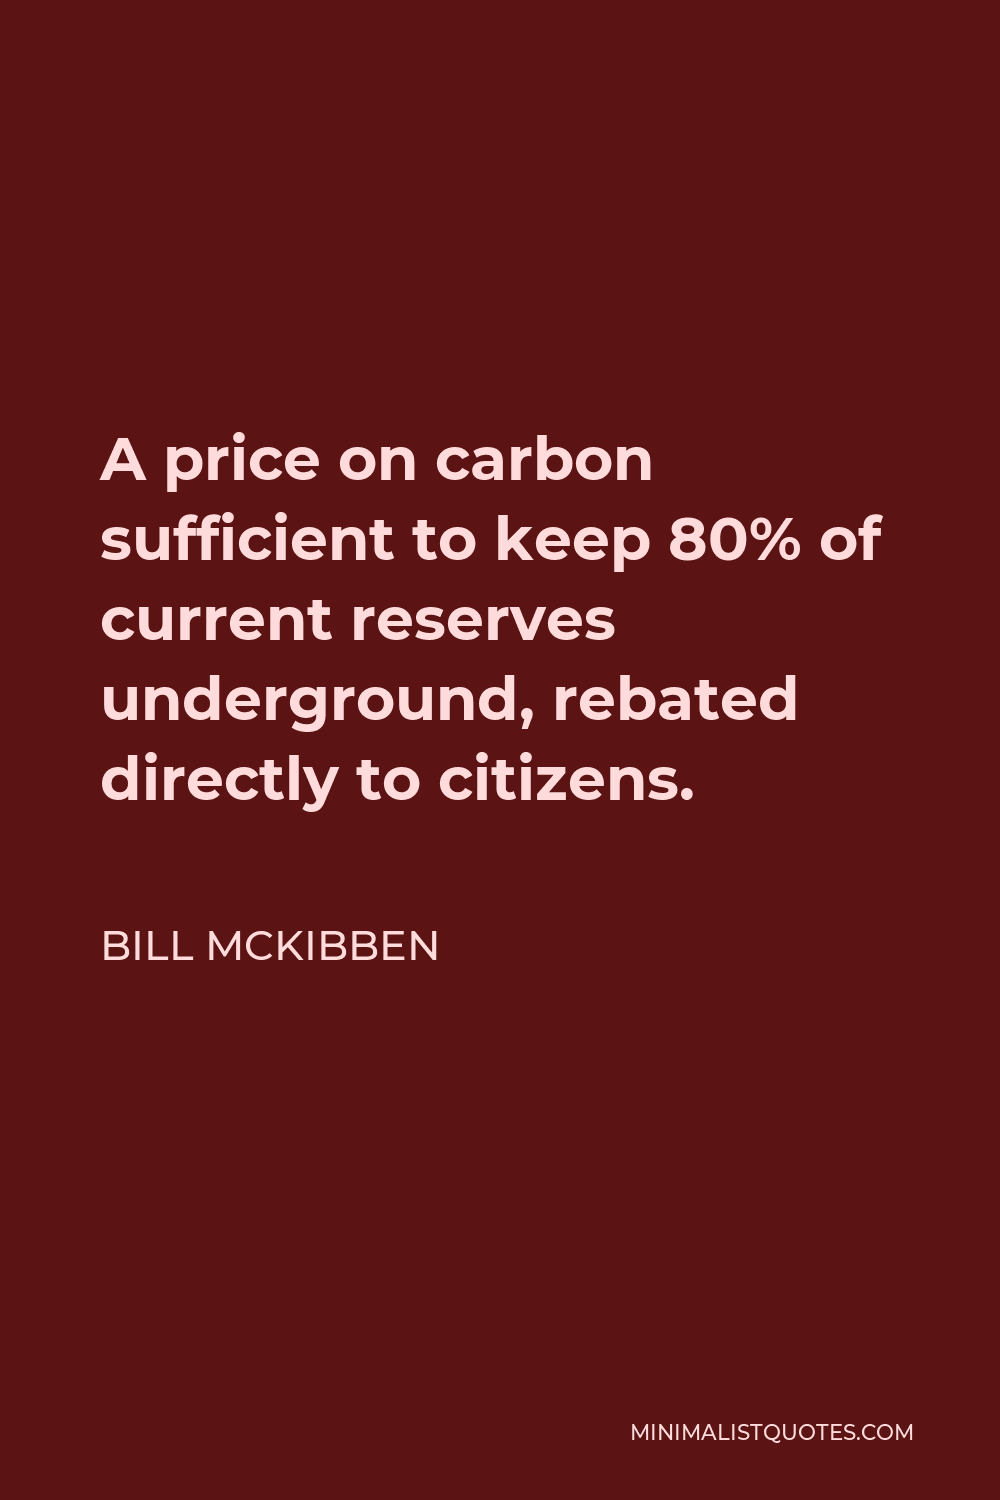 Bill McKibben Quote - A price on carbon sufficient to keep 80% of current reserves underground, rebated directly to citizens.